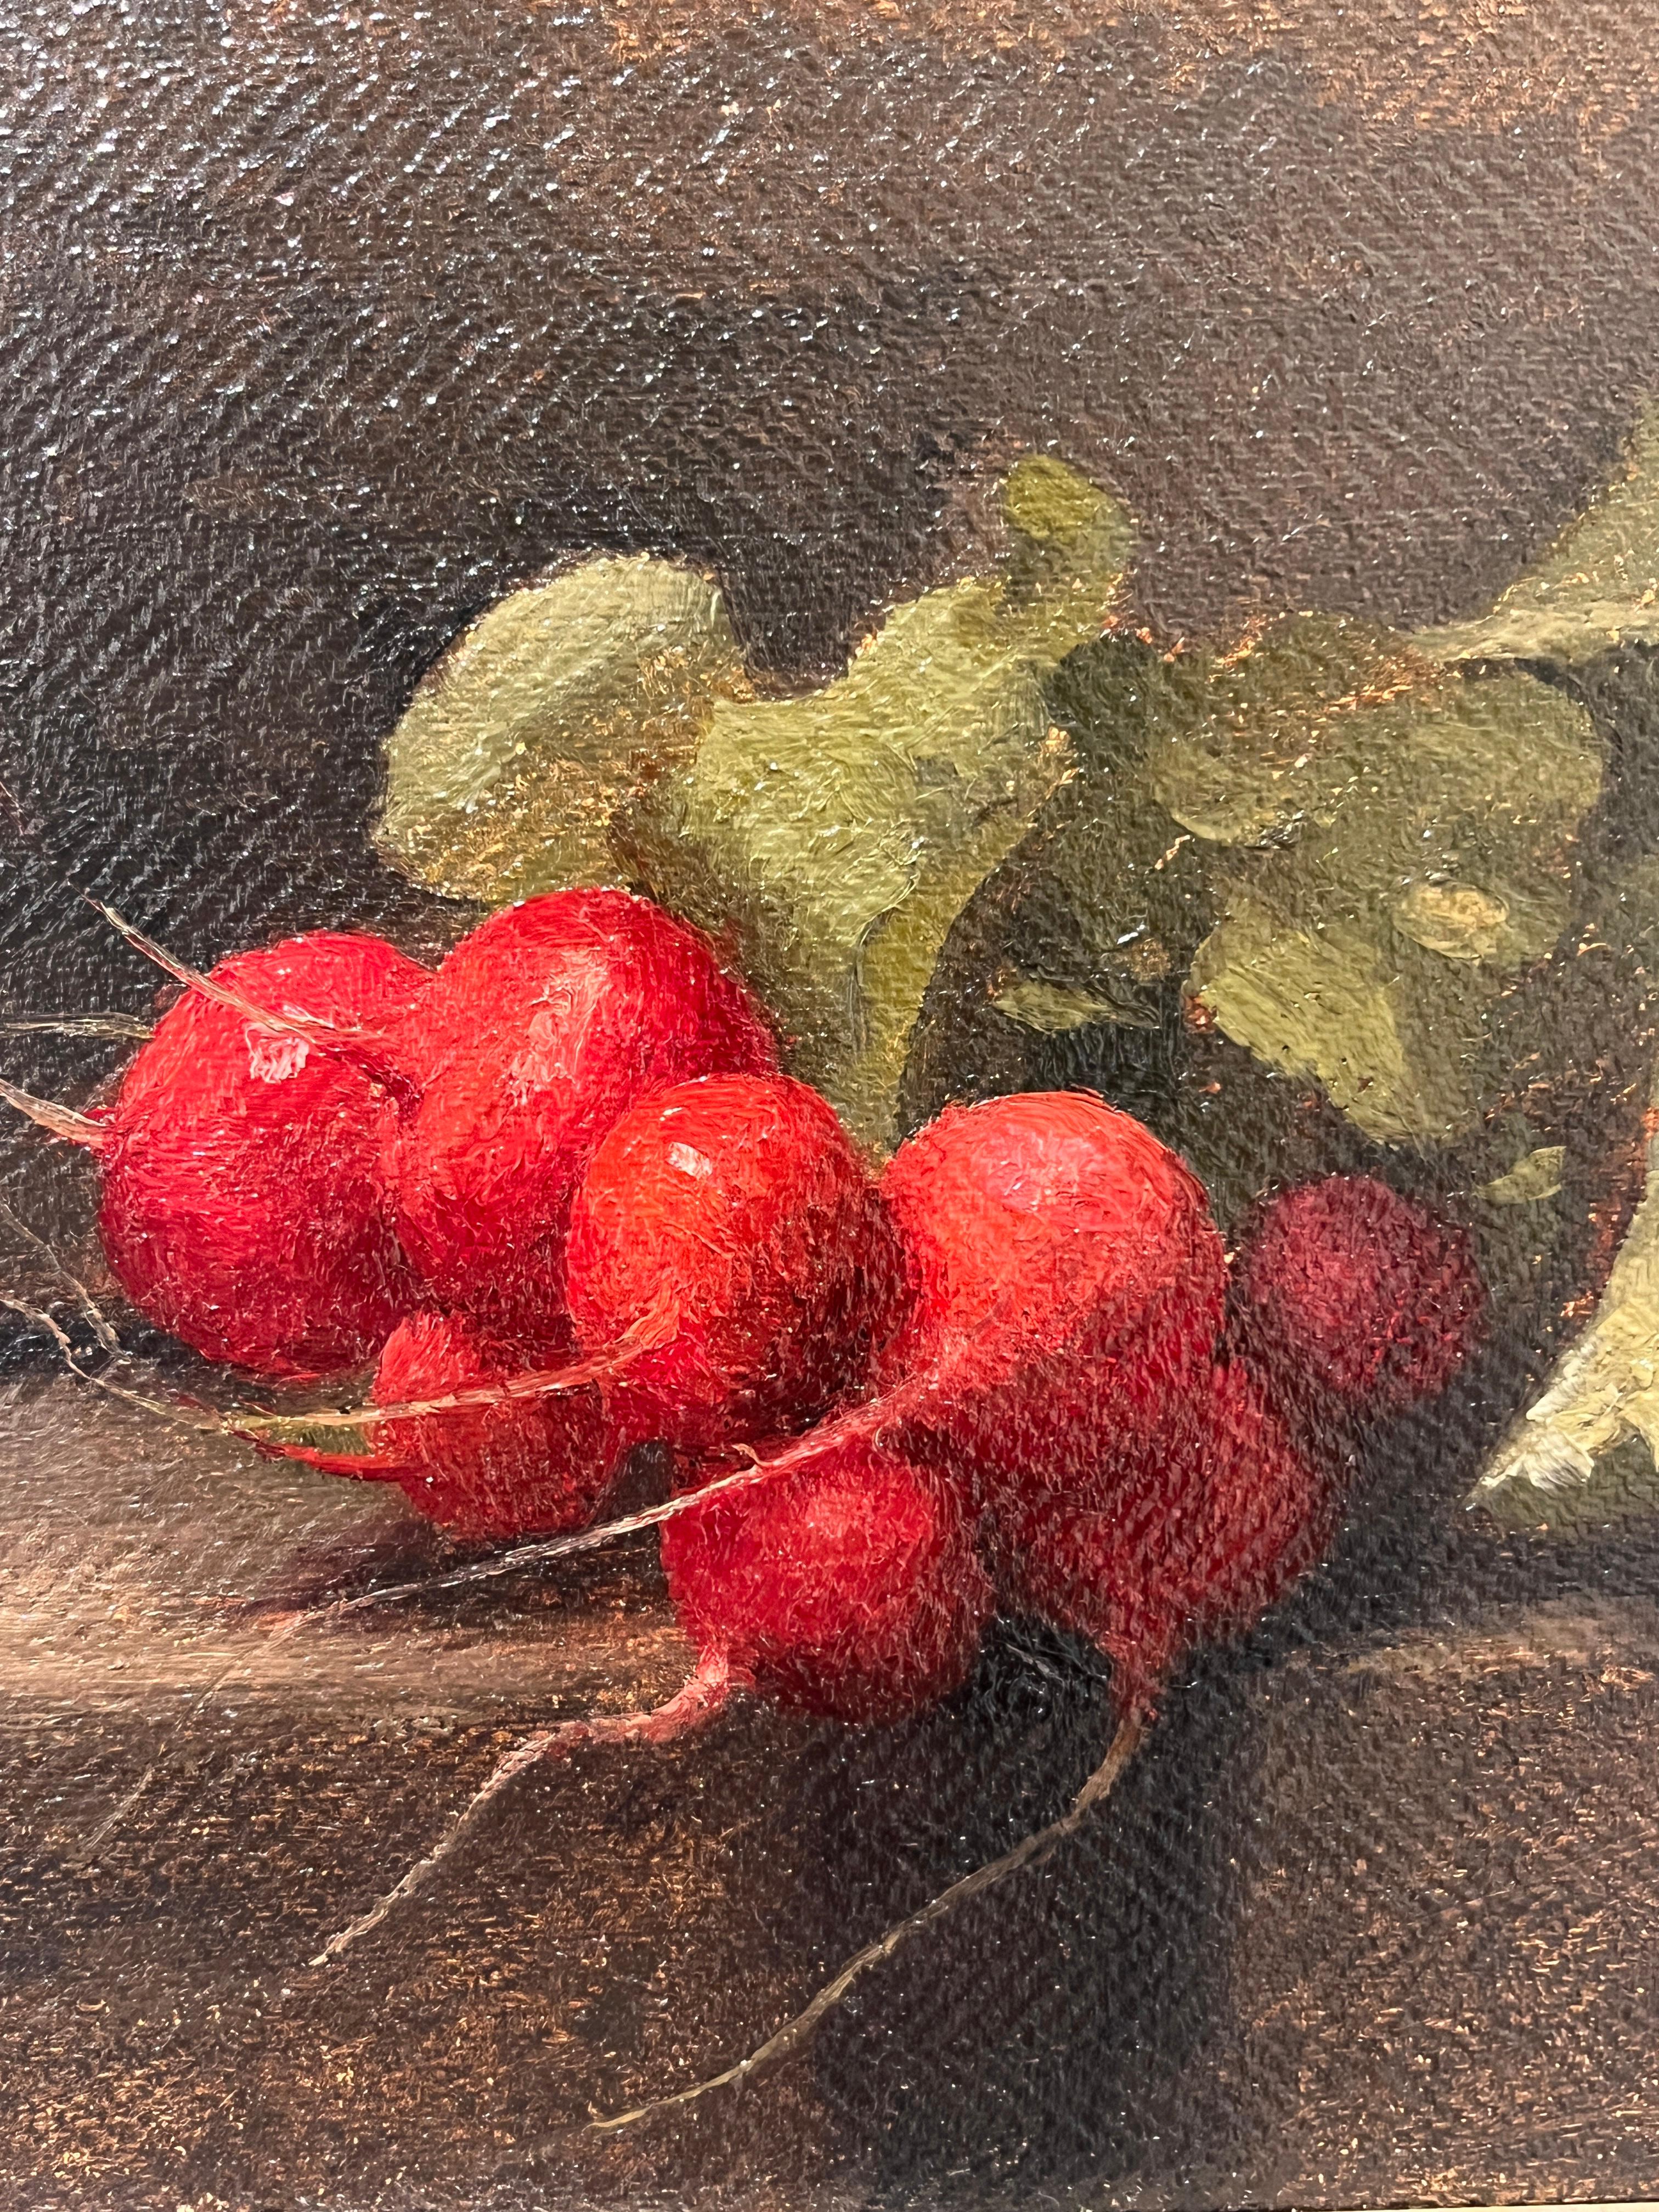 Dale Zinkowski is a master of still life. His work, reminiscent of Golden Age Dutch still life painting, glows with light and subtle, quiet beauty. This original oil painting shows a bunch of beautifully ripe radishes on a dark ground so that their